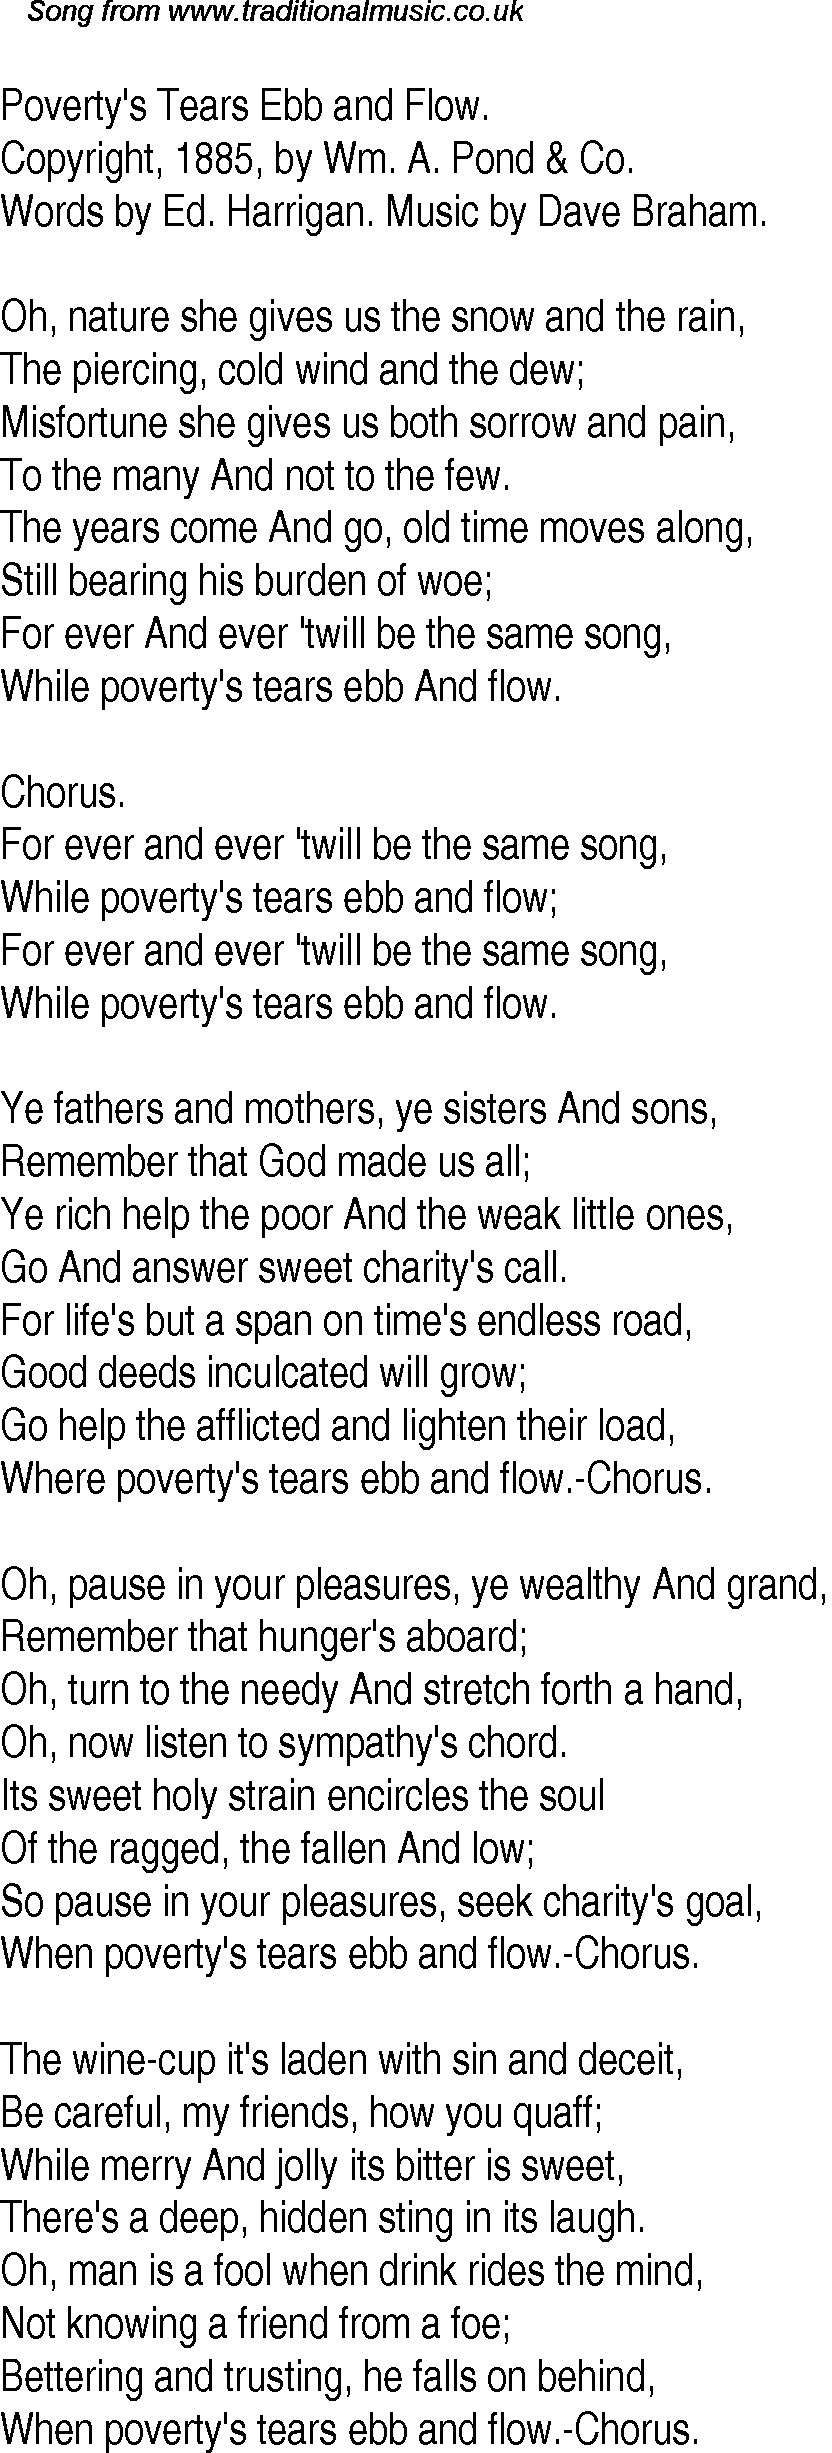 Old Time Song Lyrics For 29 Povertys Tears Ebb And Flow